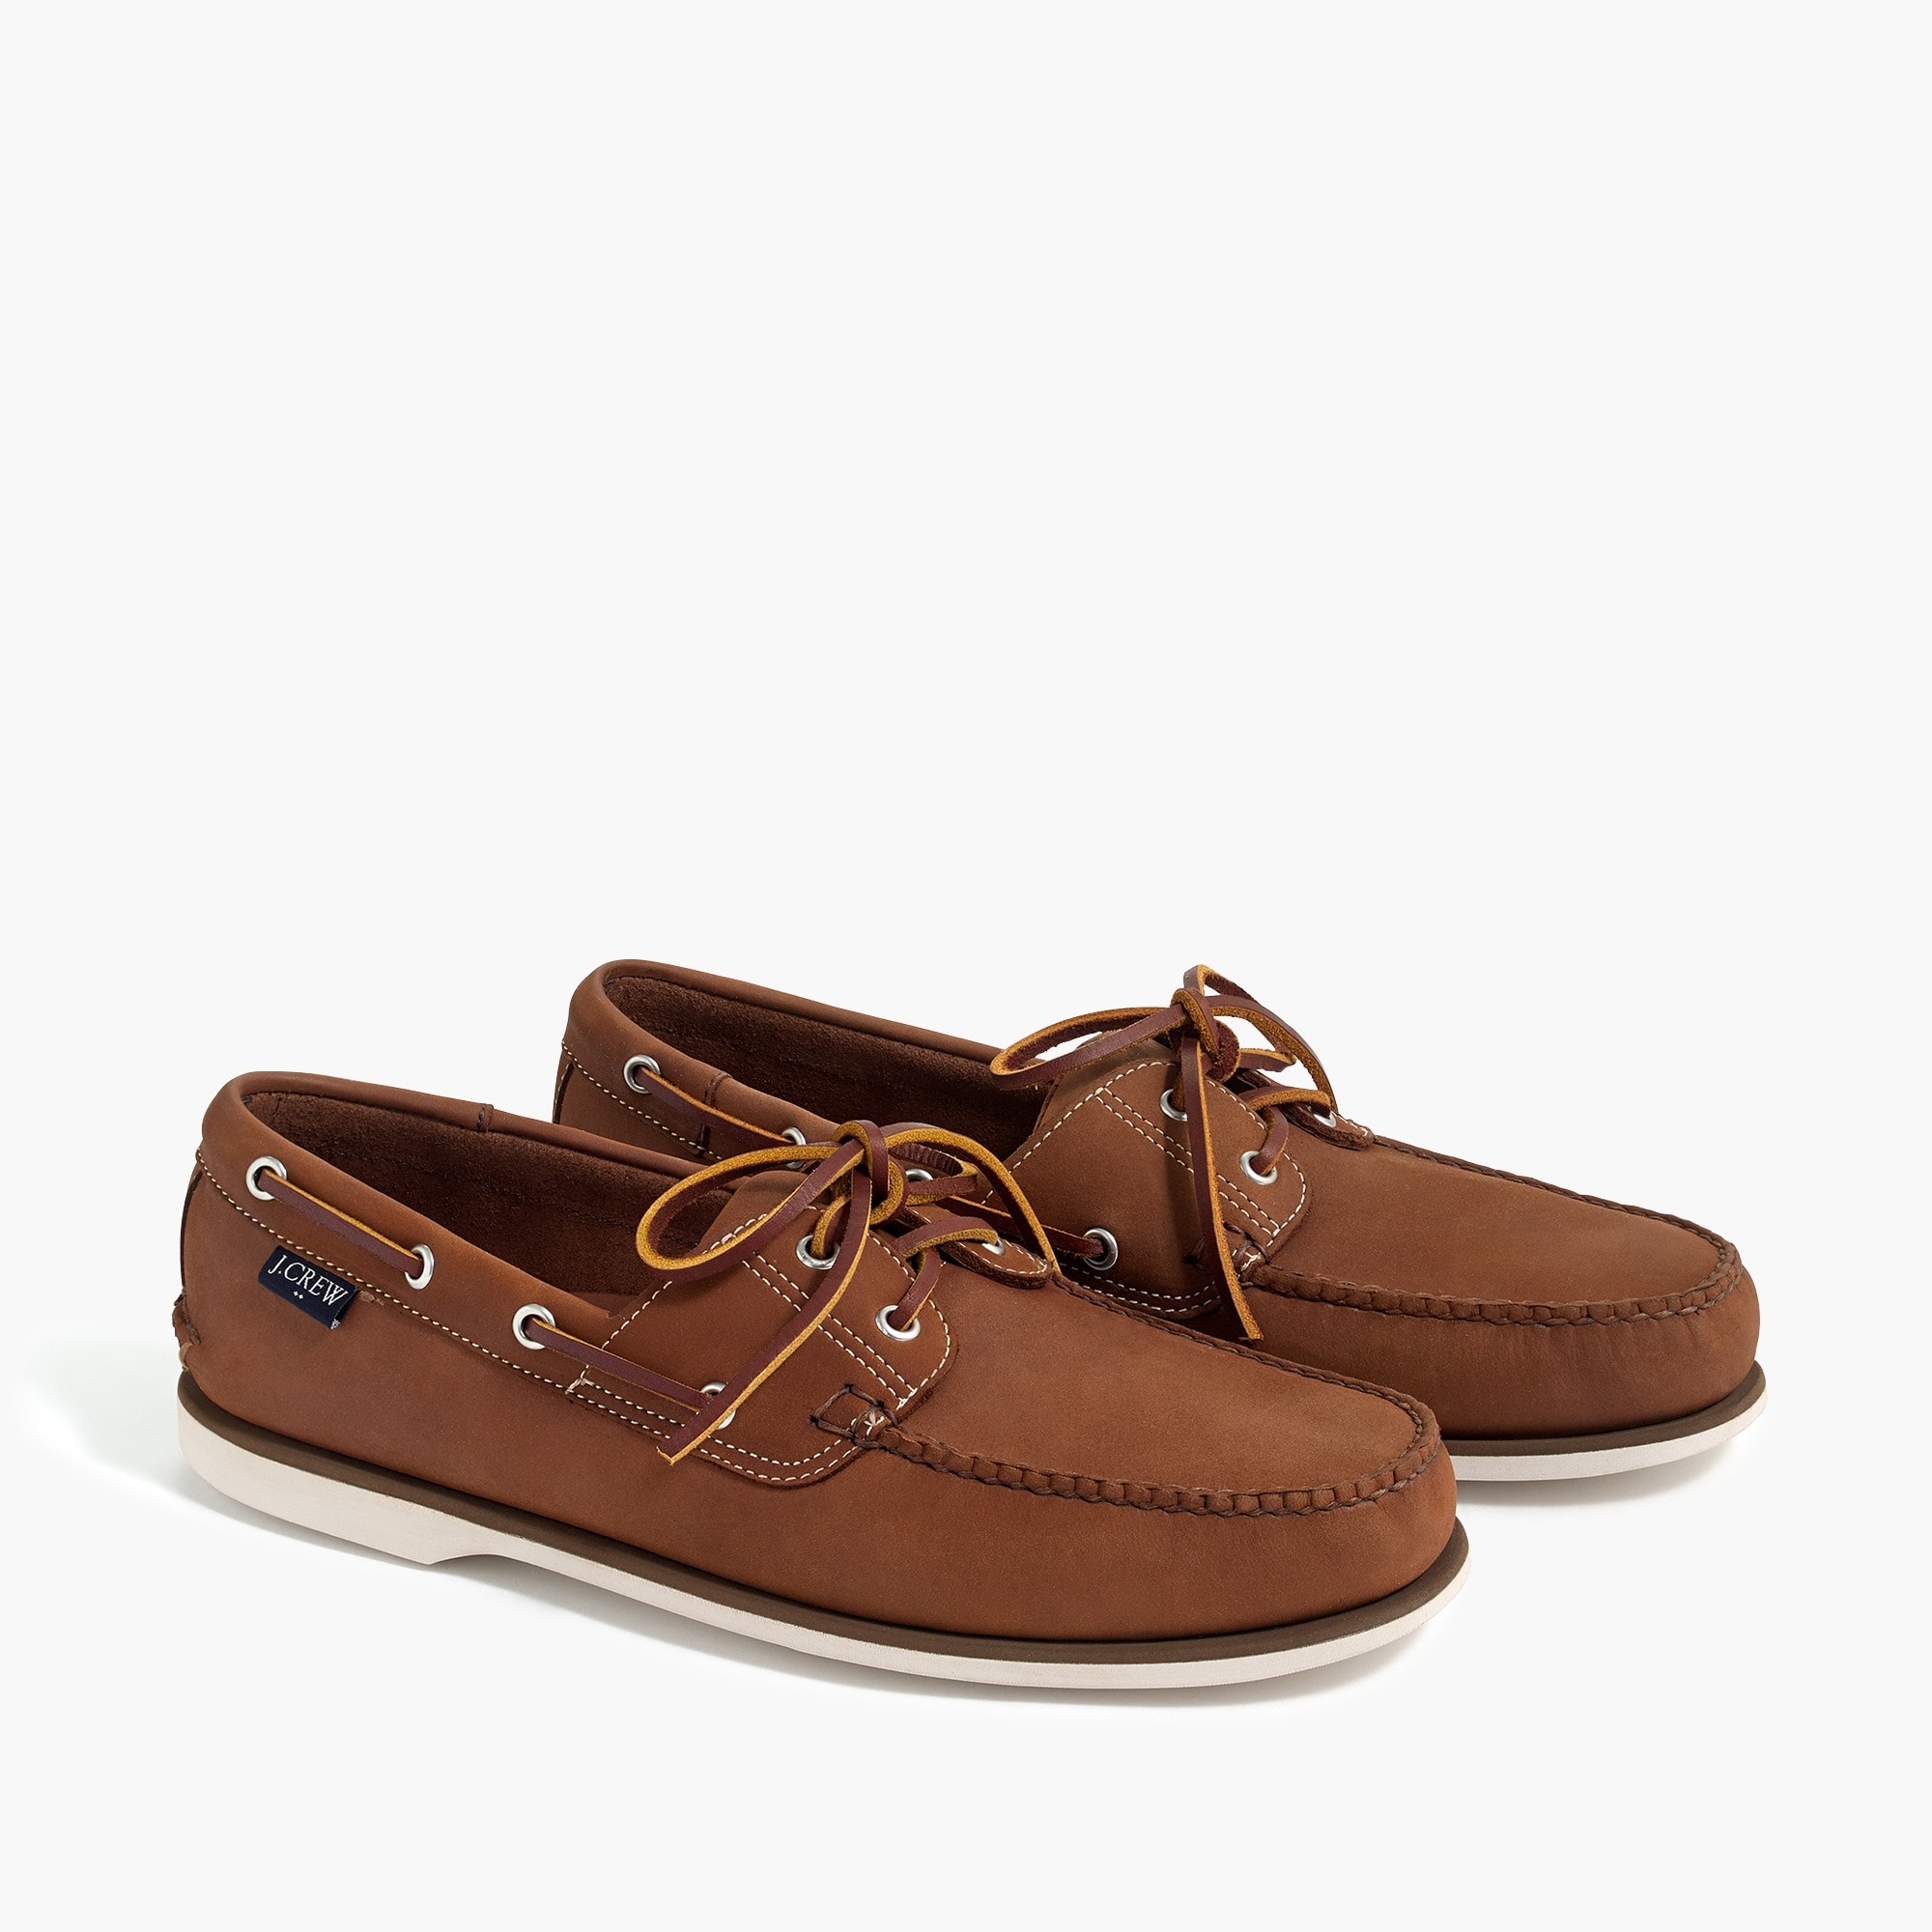 leather boat shoes